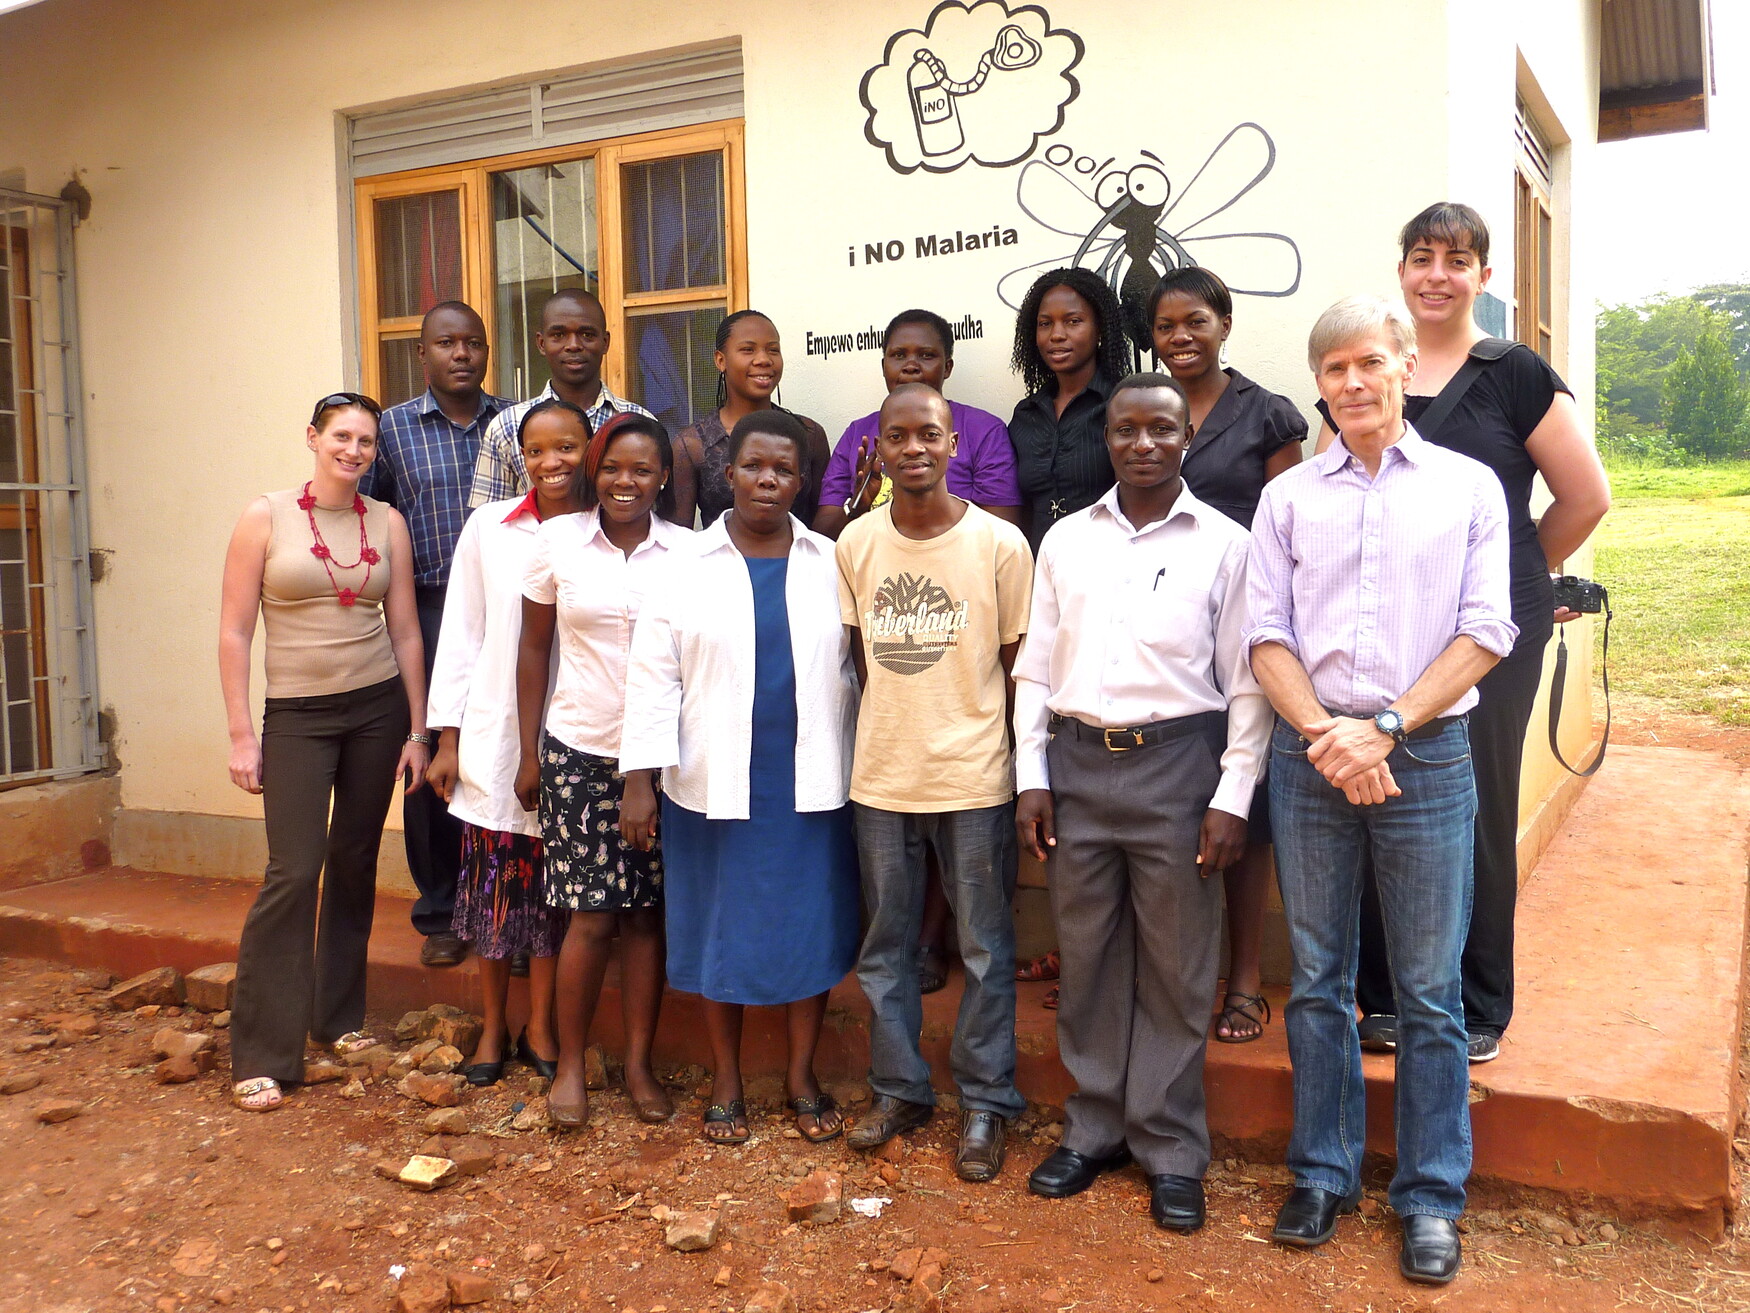 Canadian and Ugandan research team in Jinja, Uganda outside the pediatric referral hospital. The team worked on validating the biomarkers for the rapid test by studying 2,500 children presenting with fever. Professor Kain is on the far right.